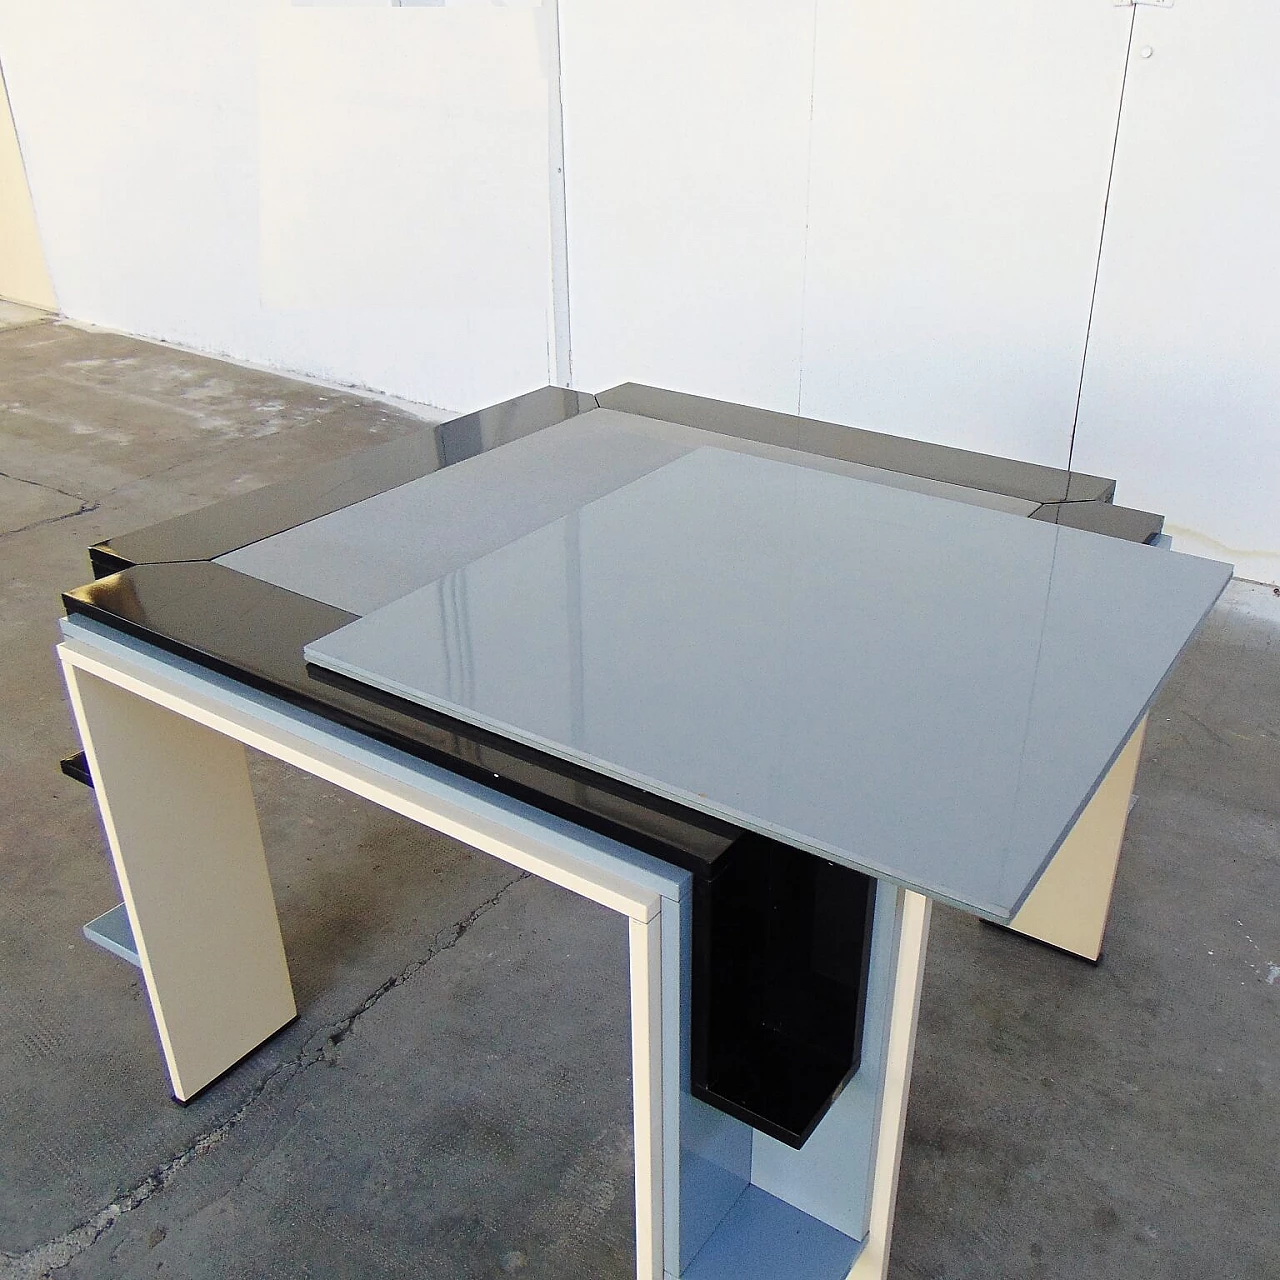 3 Dining and Card Tables Glossy Cream, Black, Gray Lacquer Double-face Top, 1980's 1167271